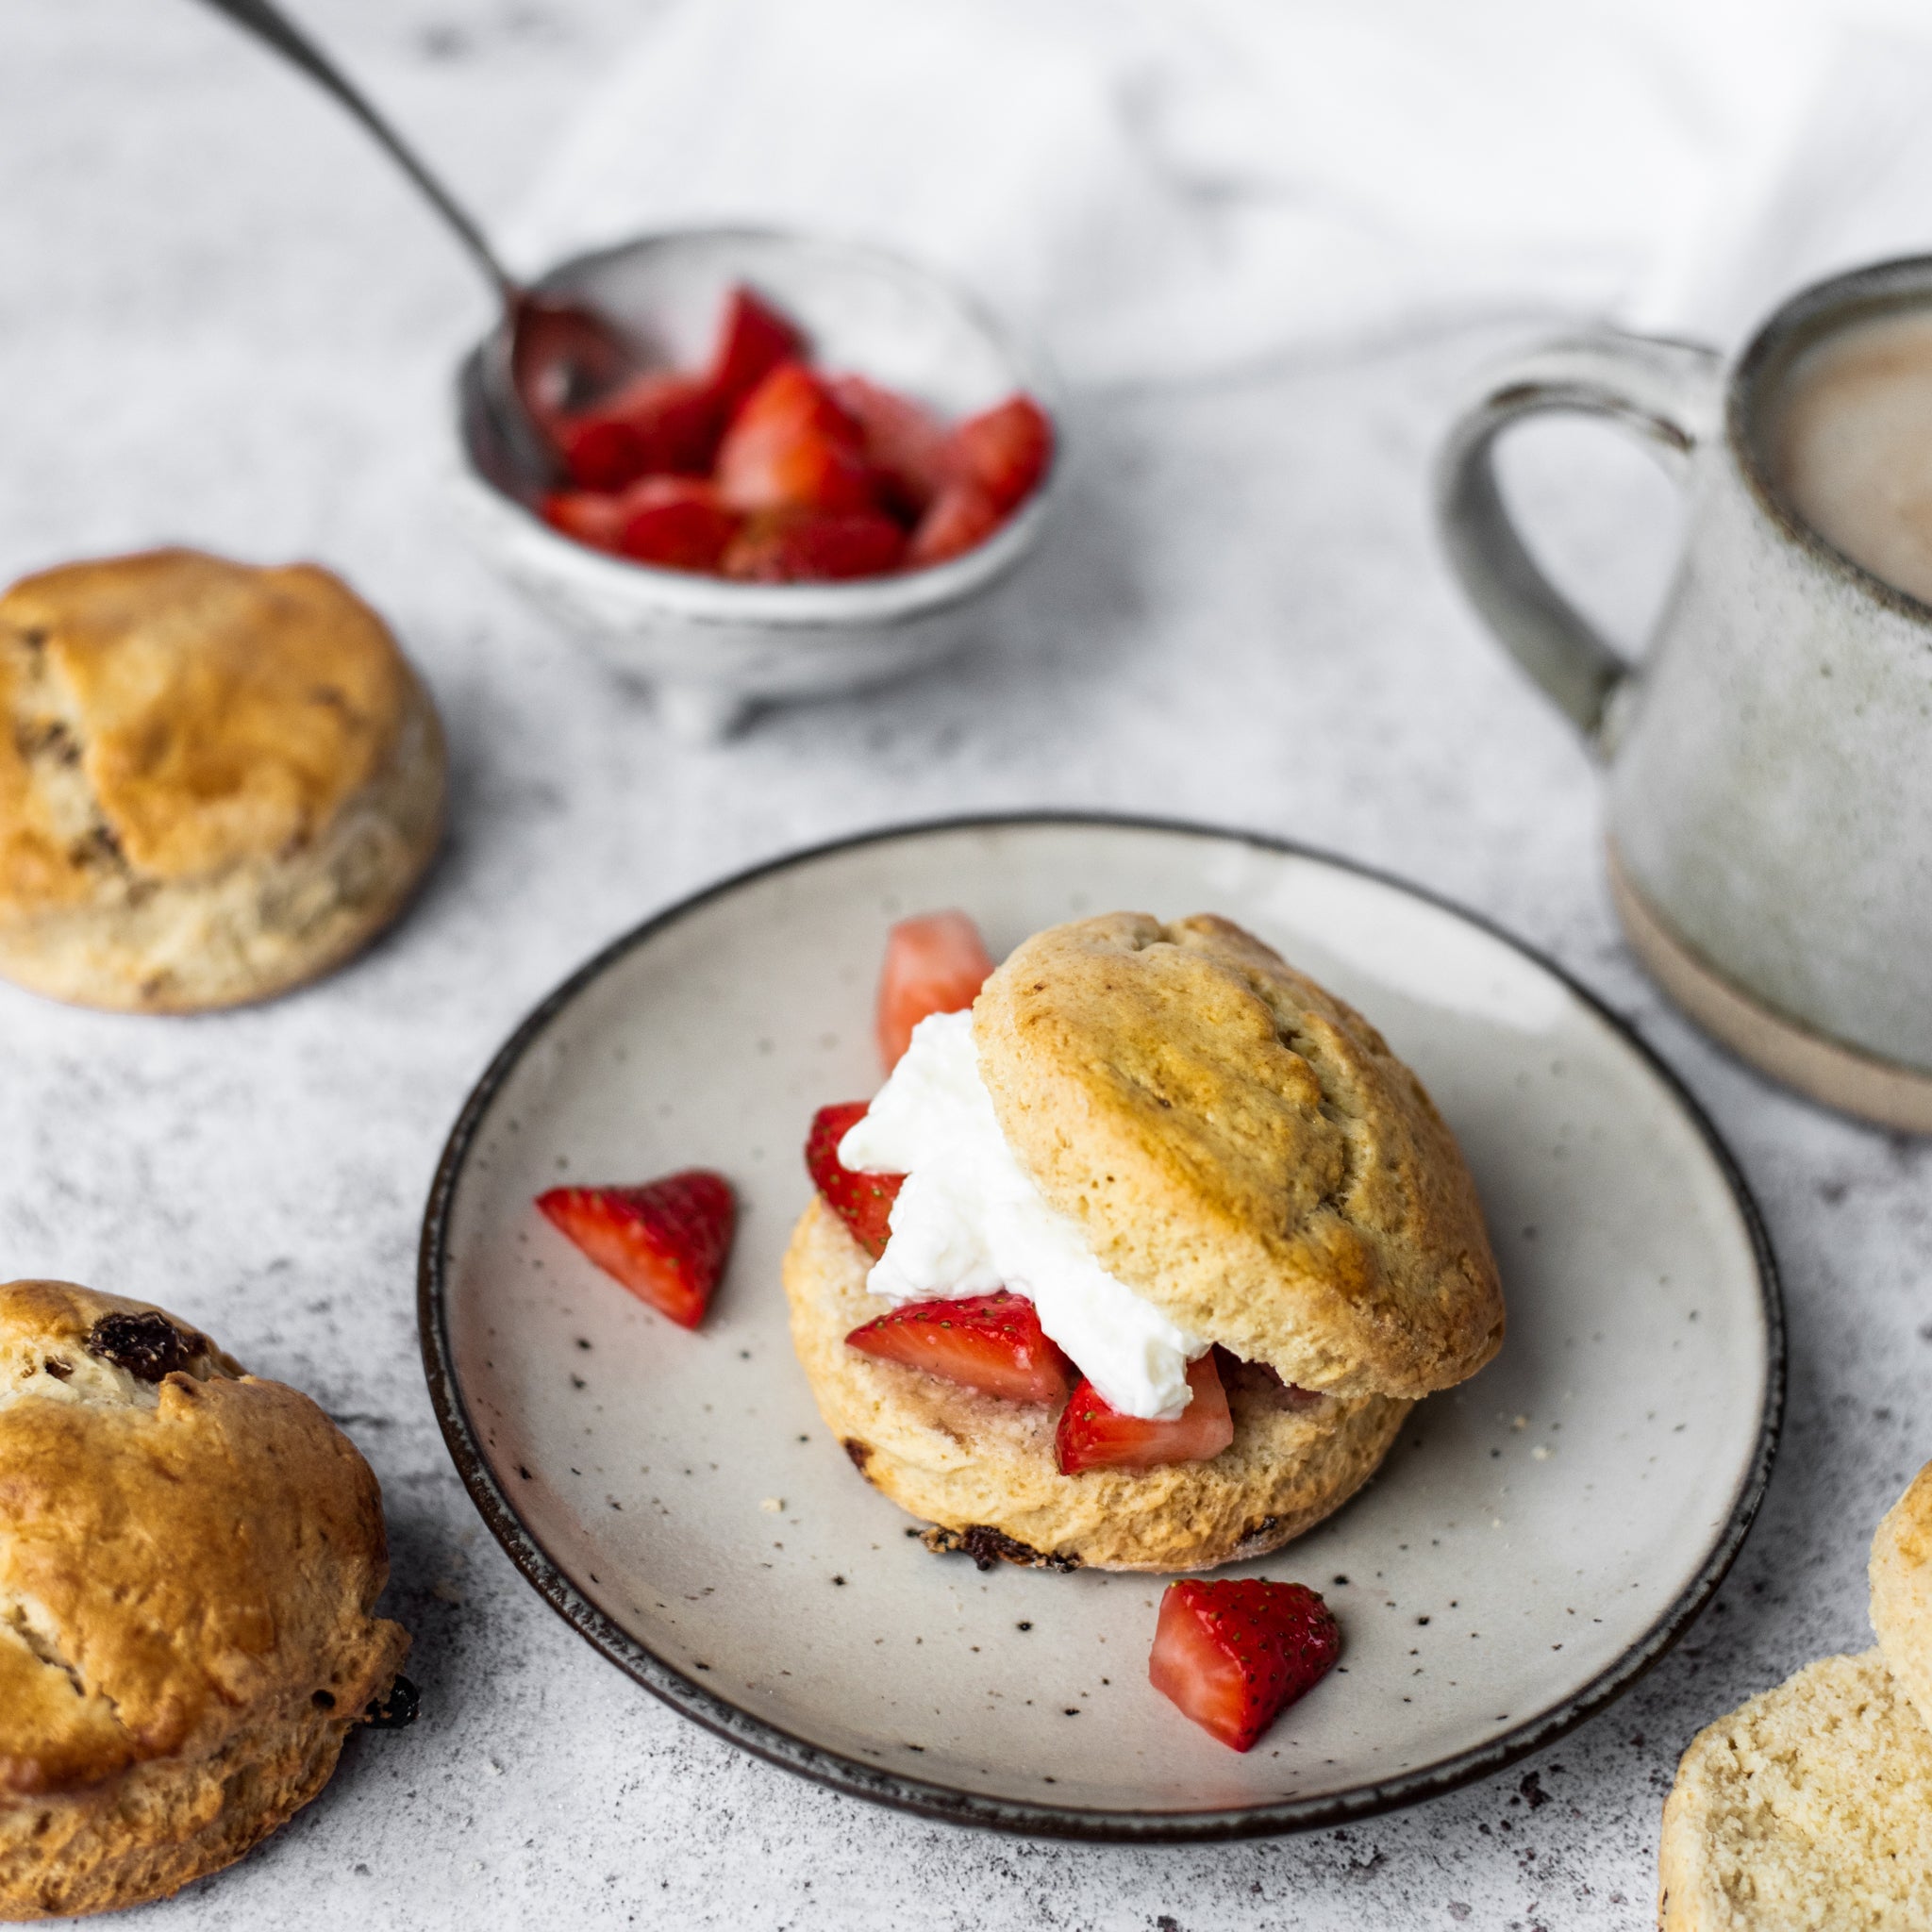 scone with strawberries and cream on a plate